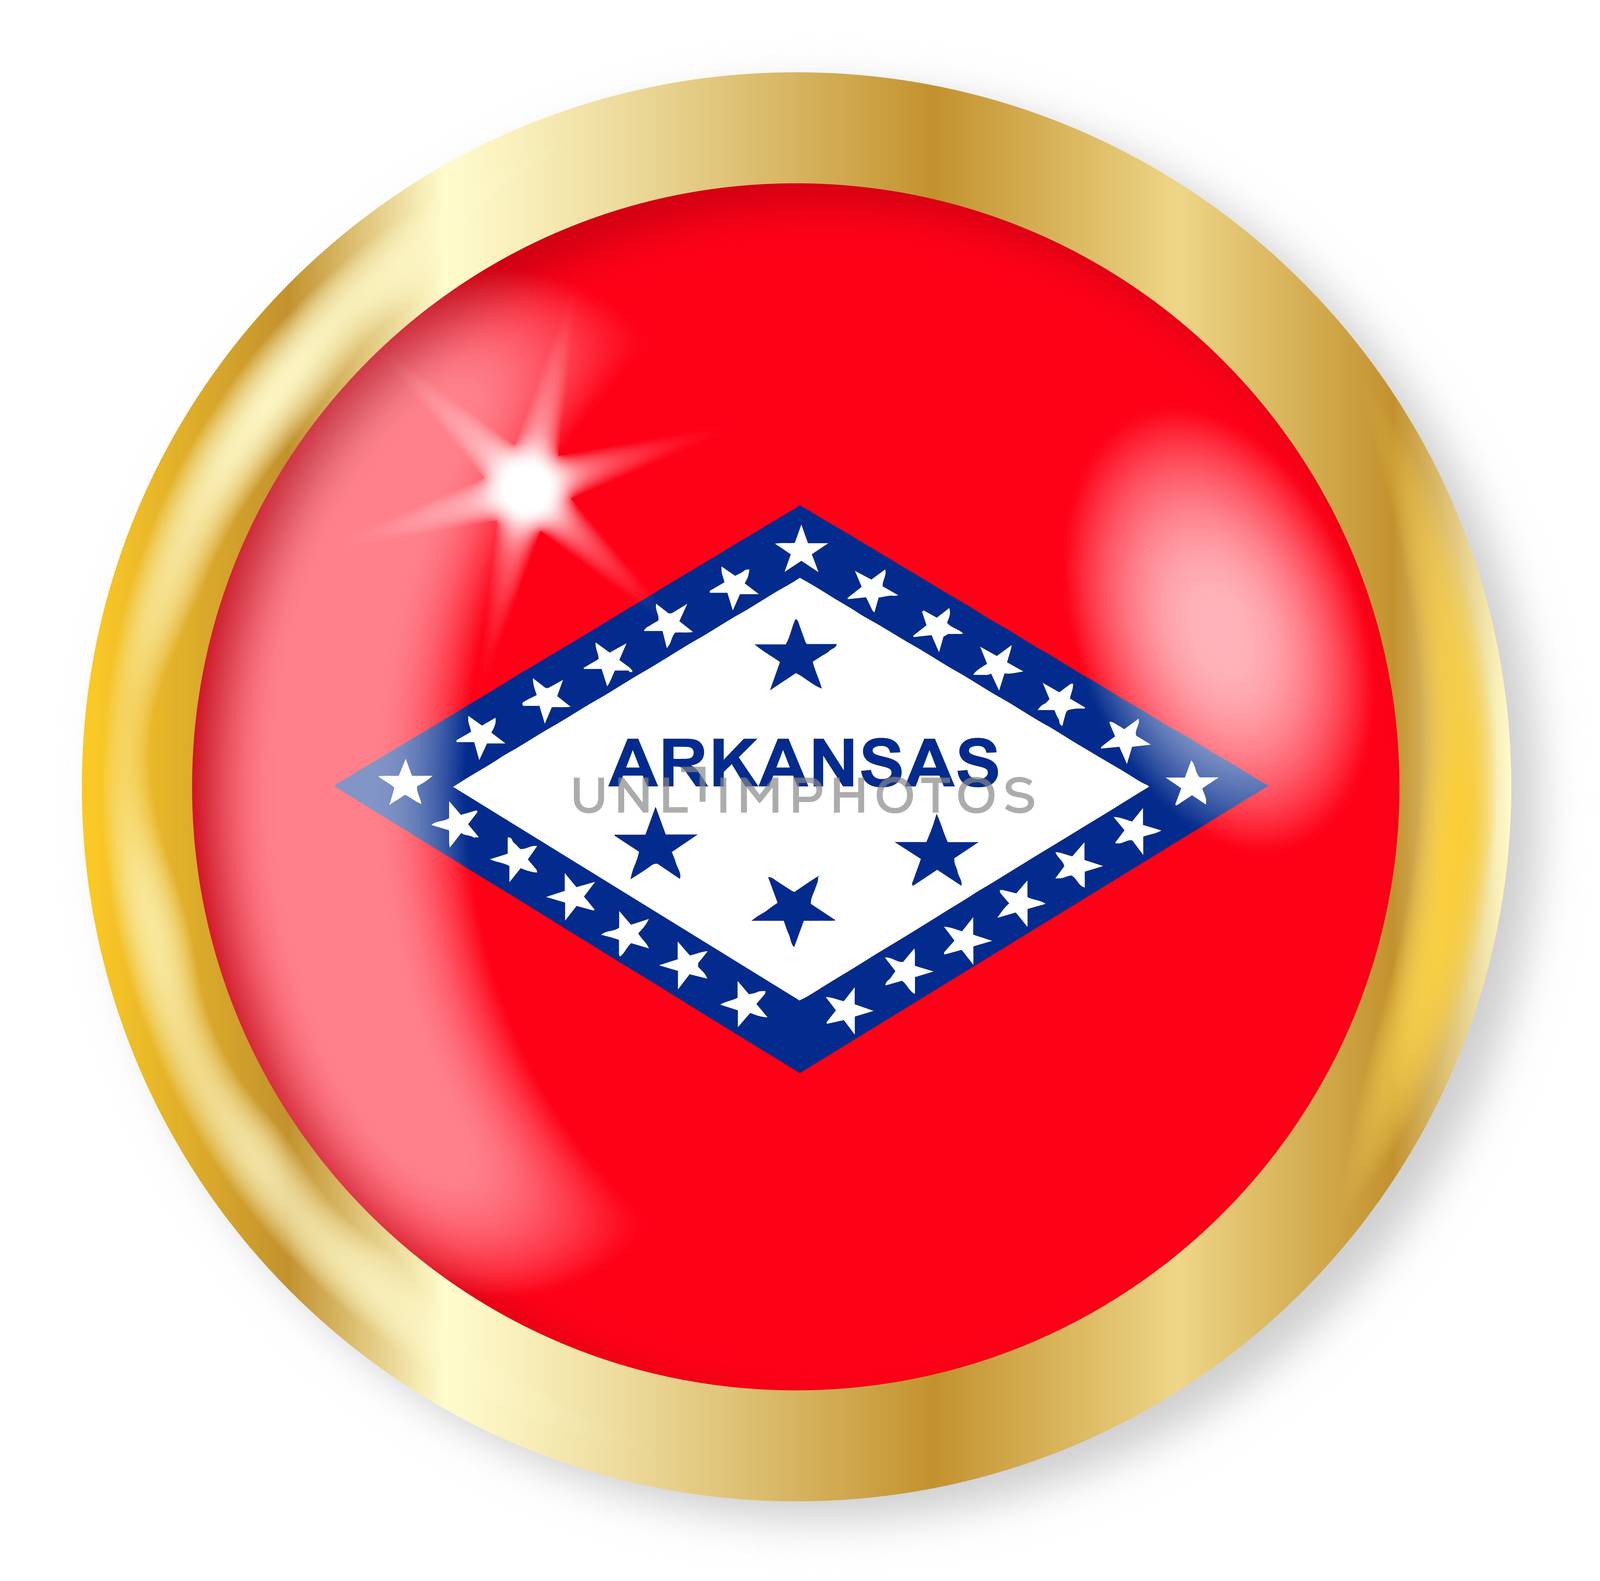 Arkansas state flag button with a gold metal circular border over a white background